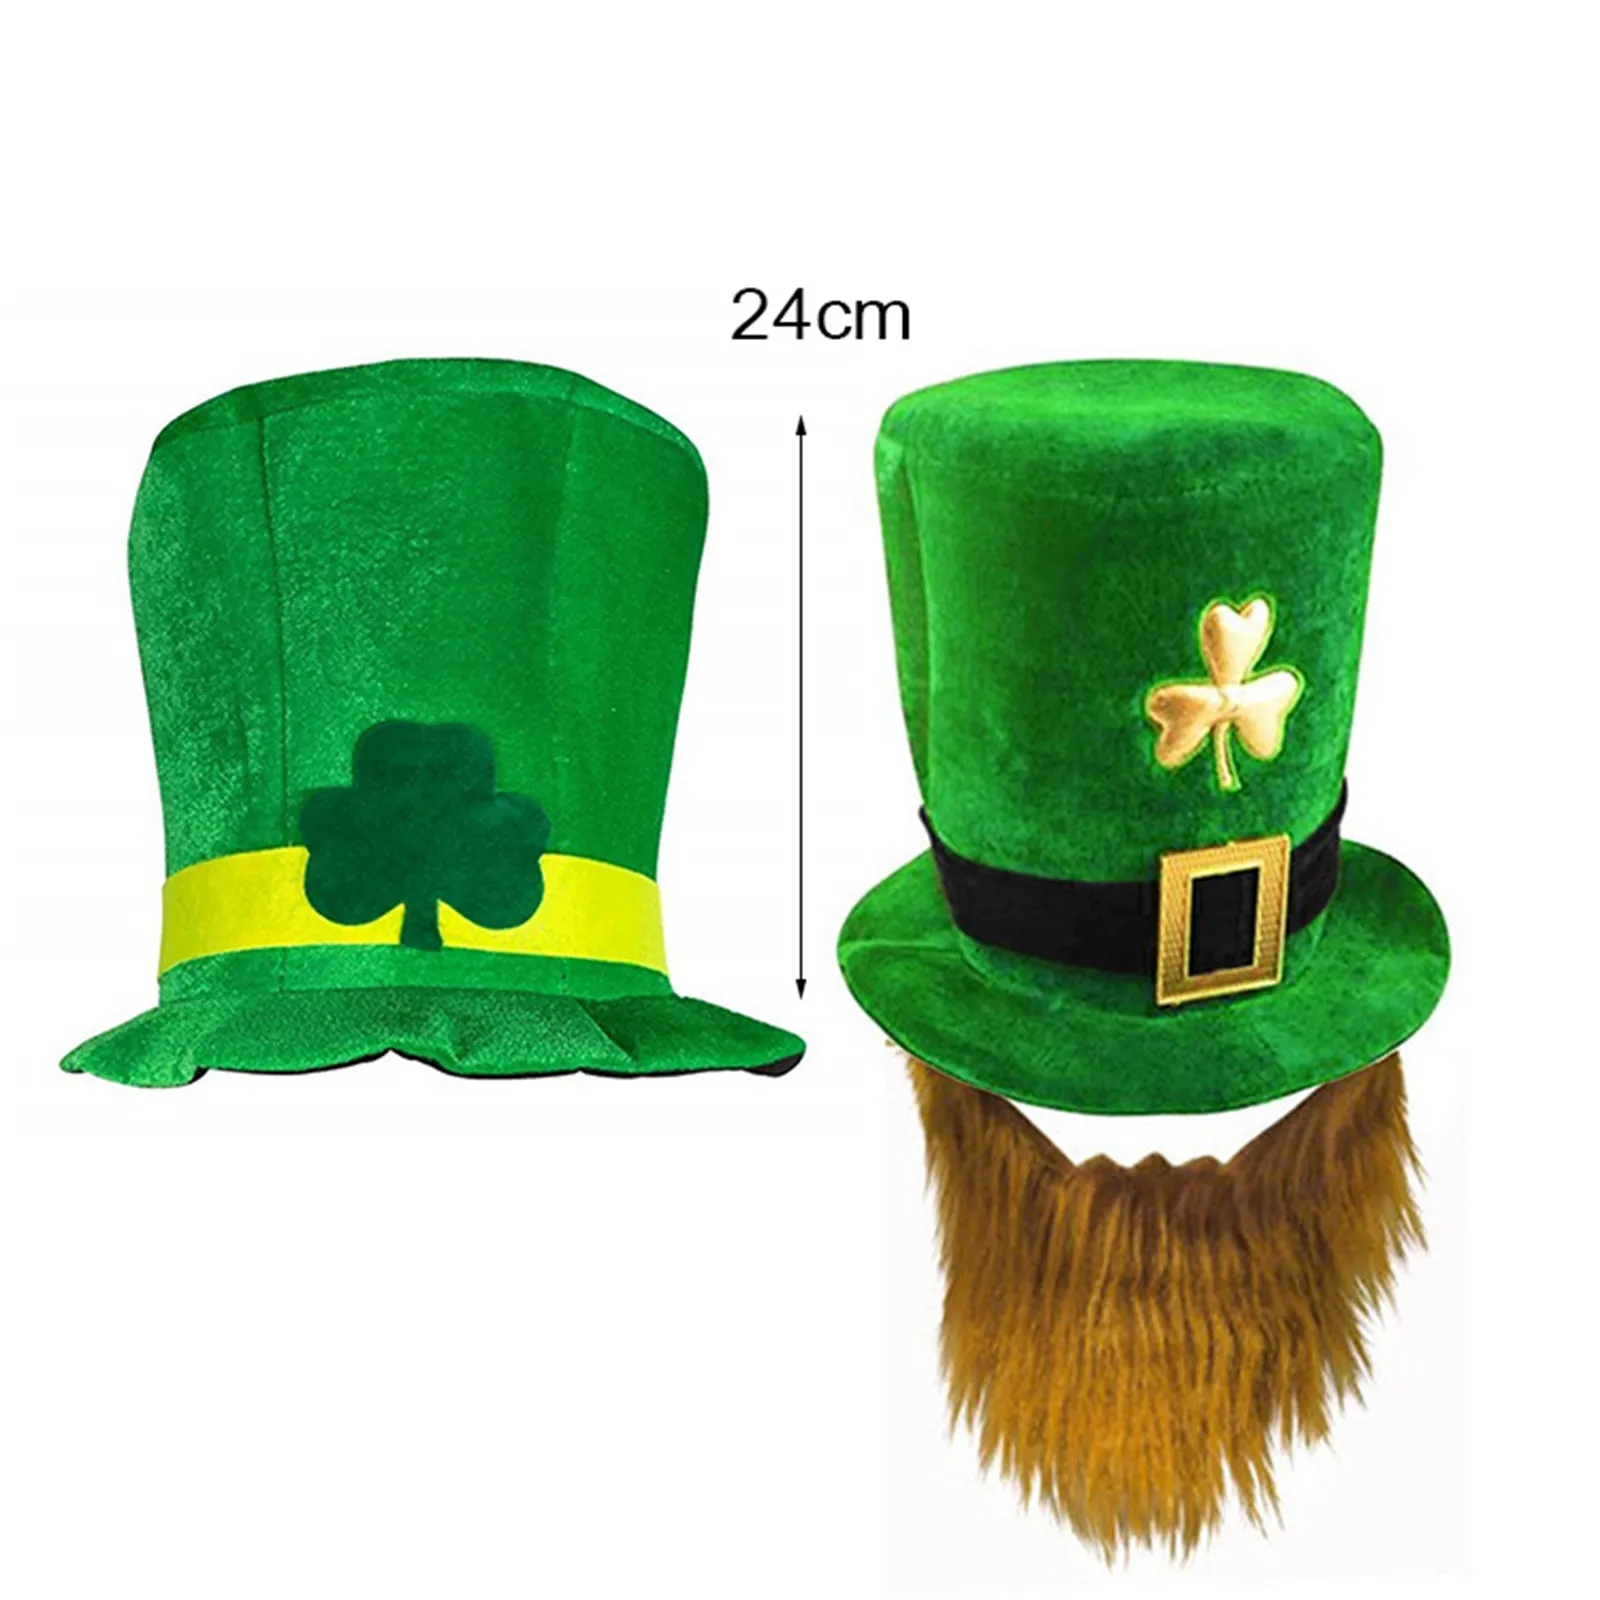 Saint St Patricks Day Green Hat Lucky Costume Accessories Celebration Carnival Props for Irish Fun Party Hat with Beard